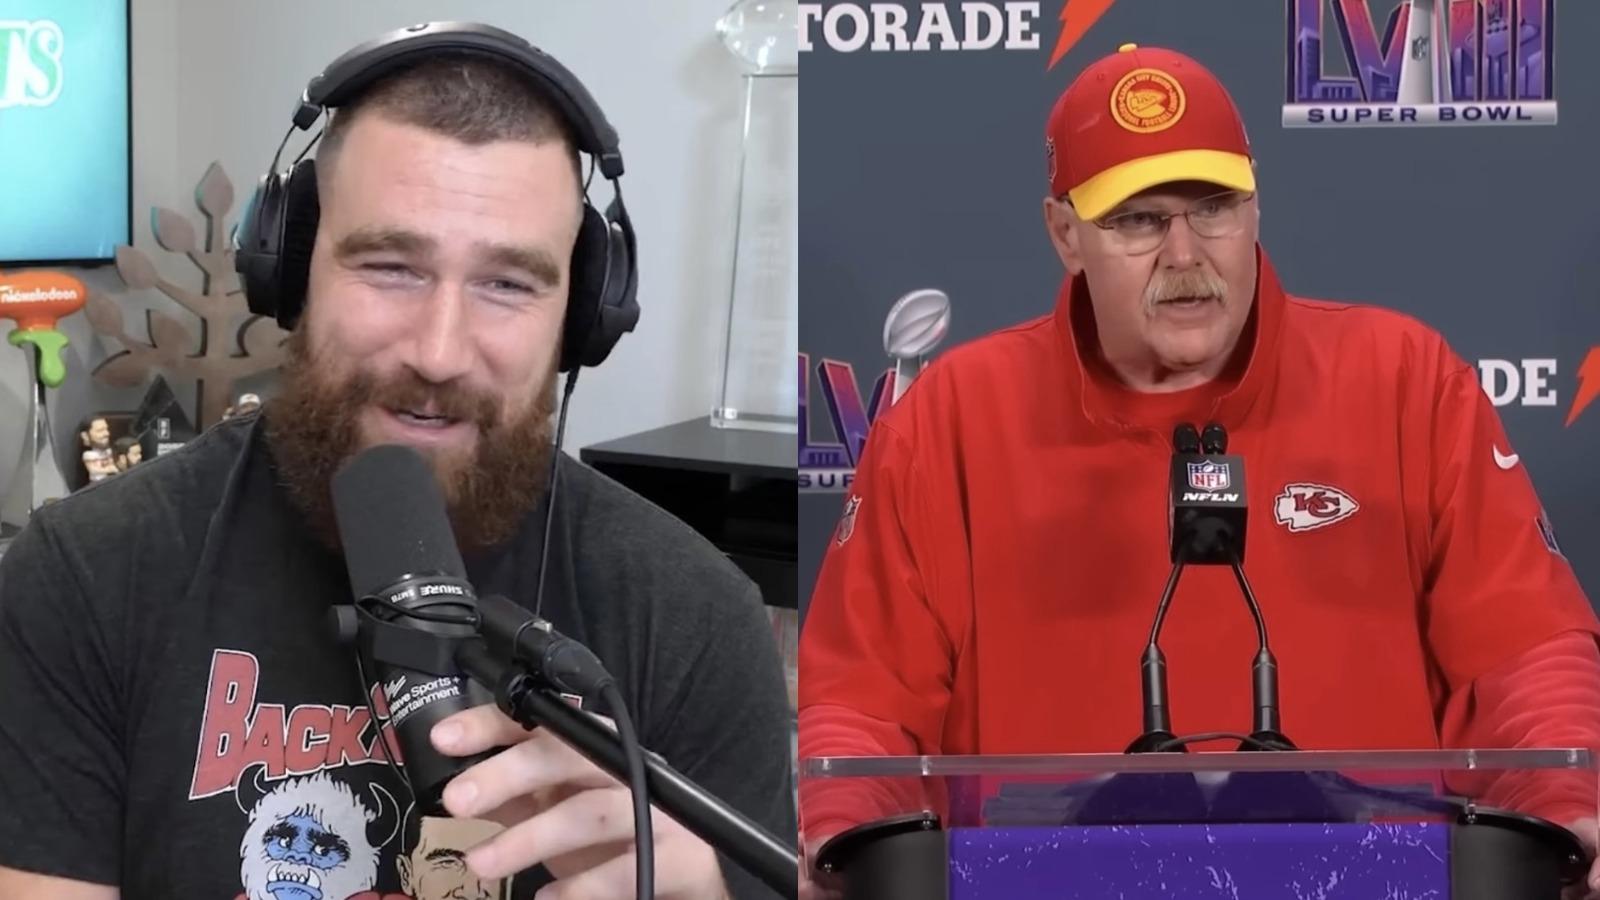 Chiefs tight end Travis Kelce says his NFL future is tied to Andy Reid even after Super Bowl clash